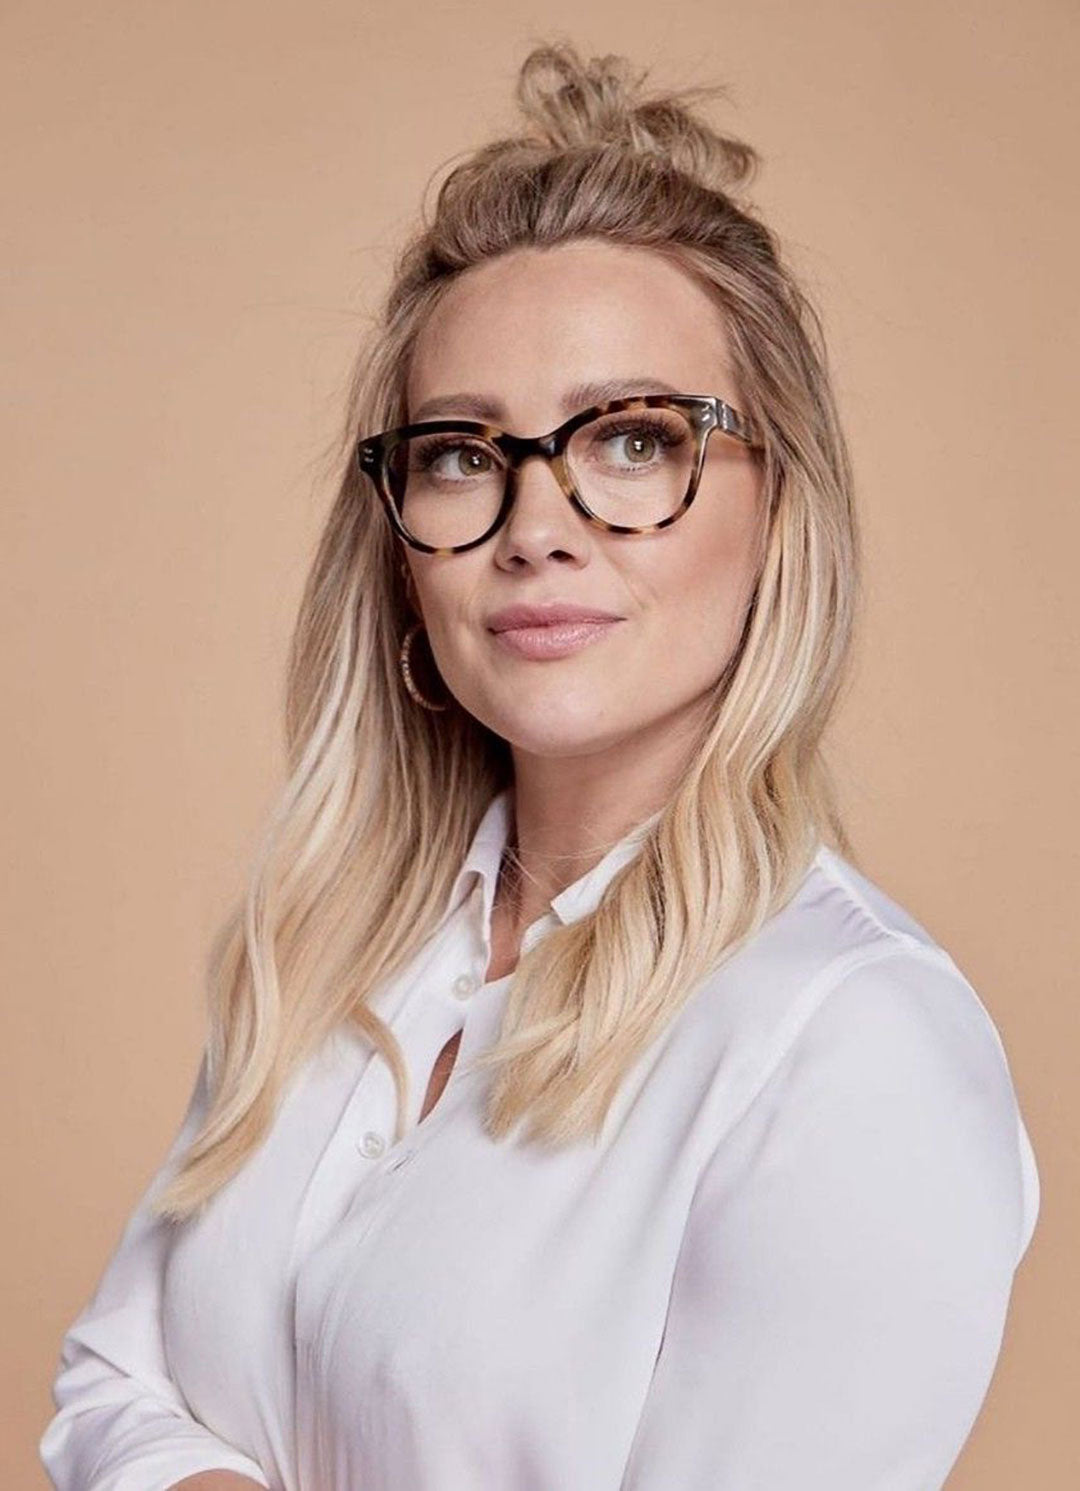 Woman with tied up blonde hair in front of beige background wearing white shirt and tortoise glasses